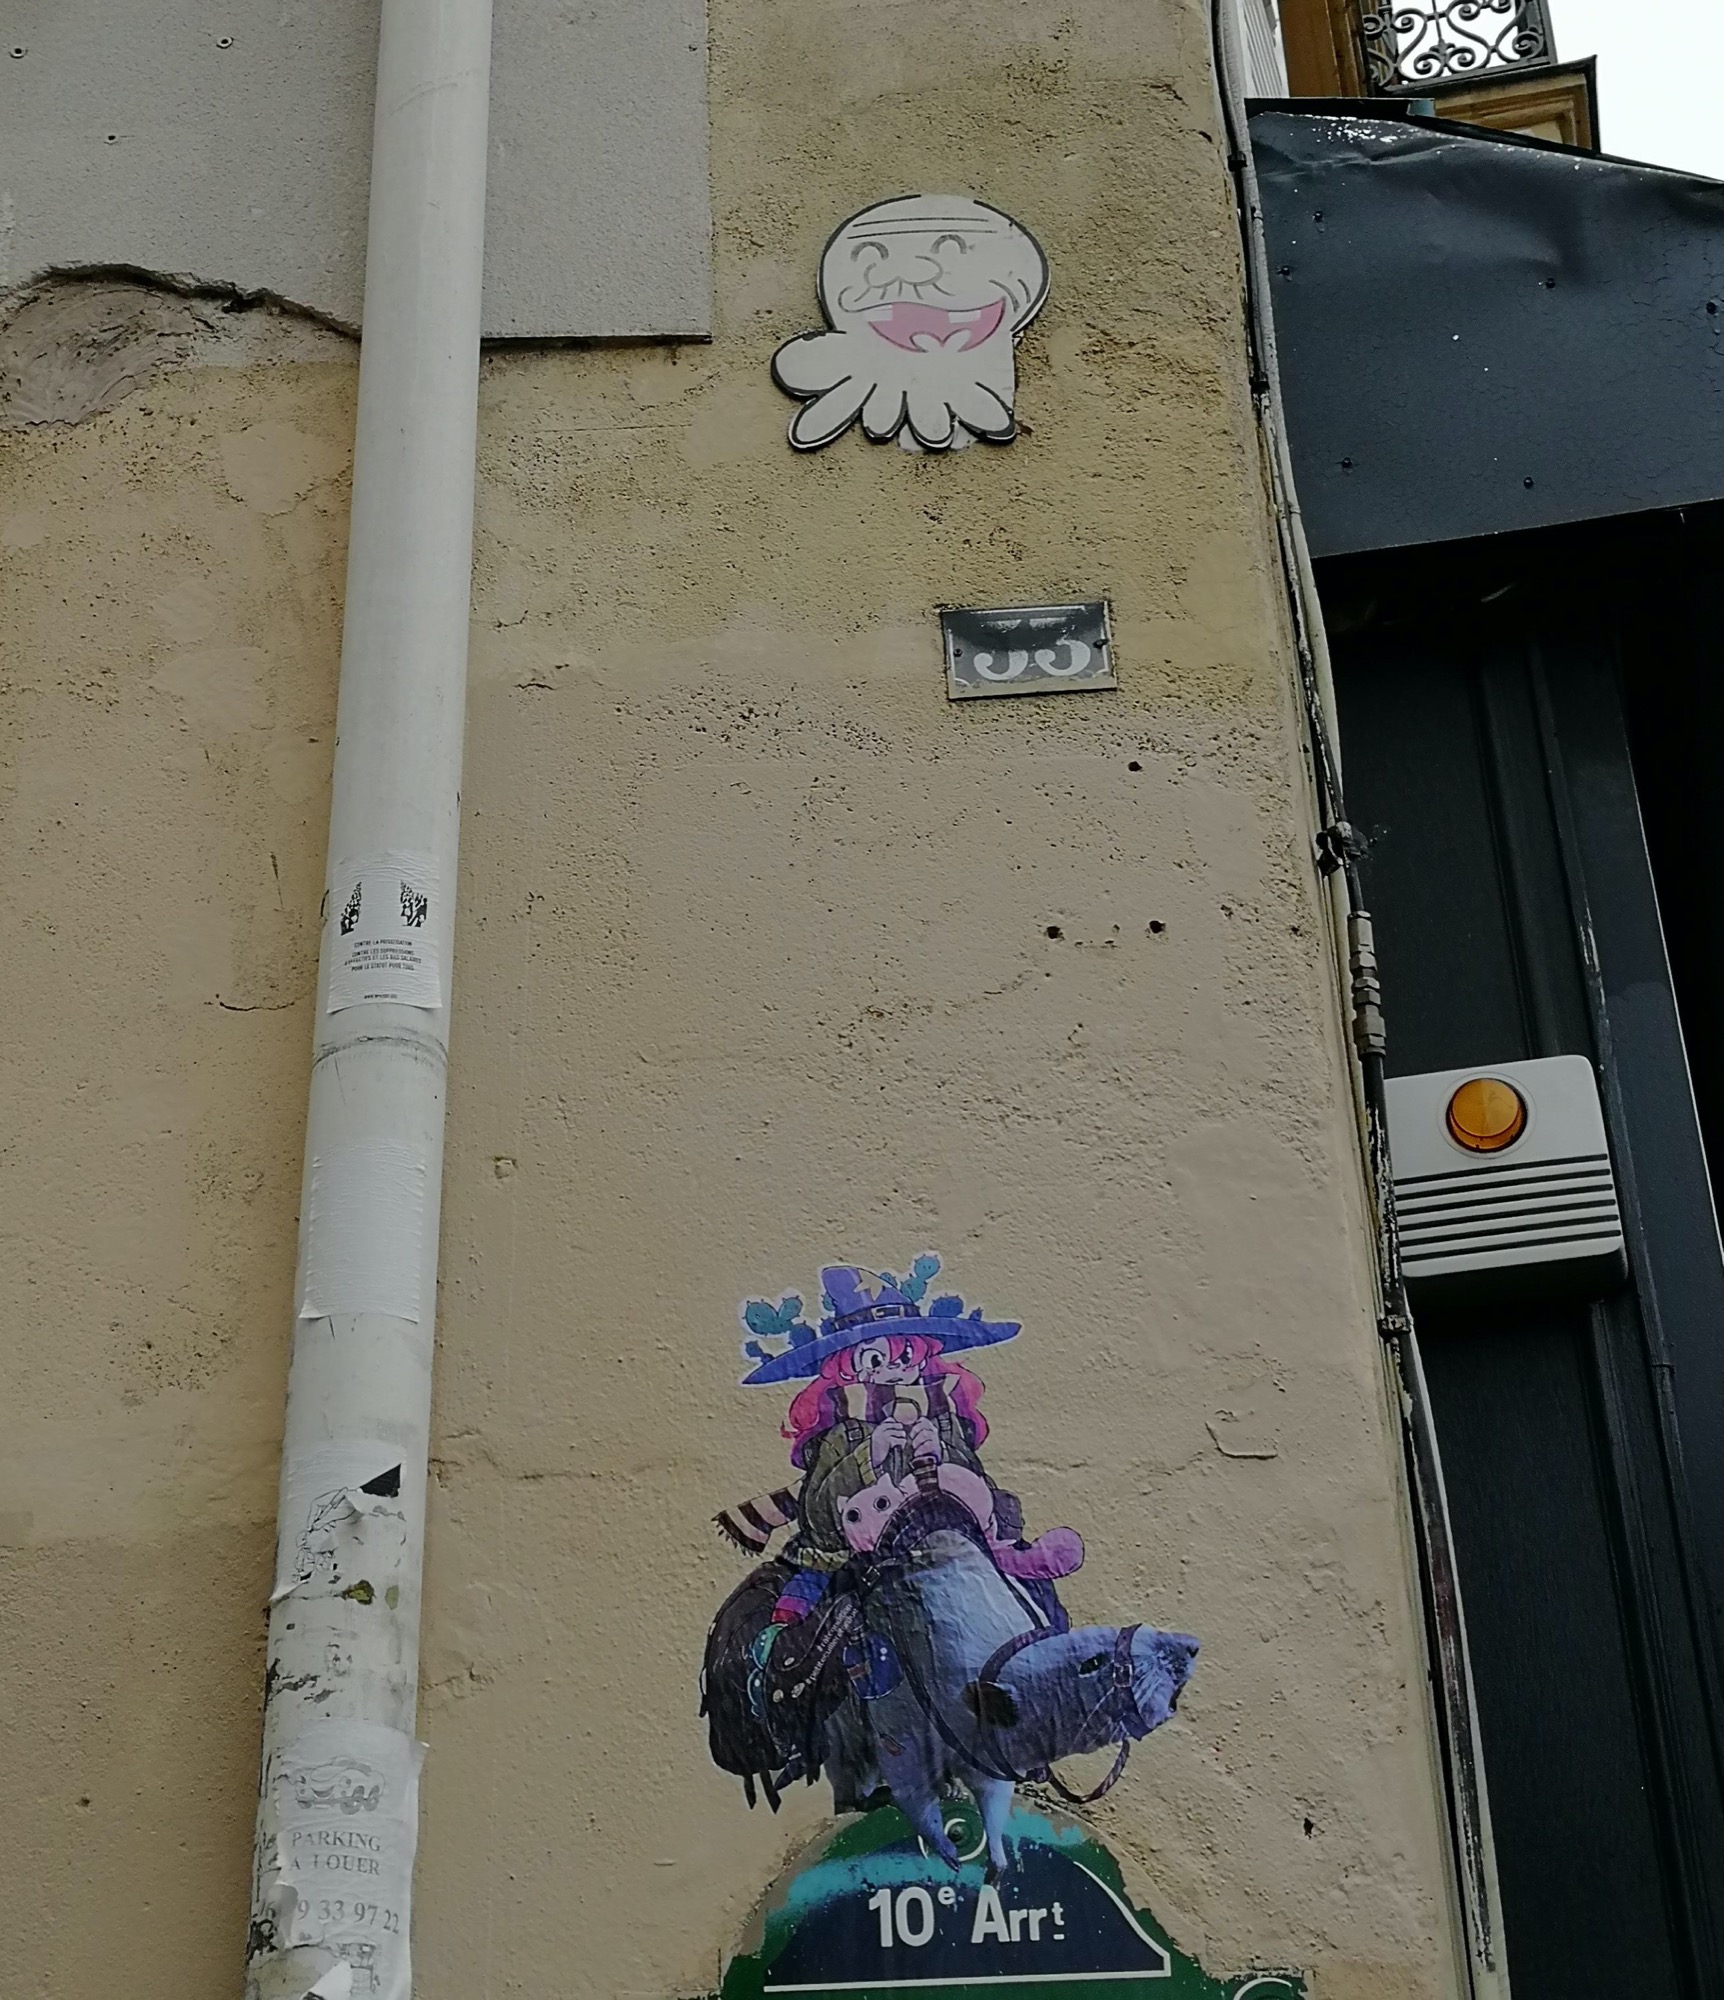 Sticking 623  by the artist Gzup captured by Rabot in Paris France